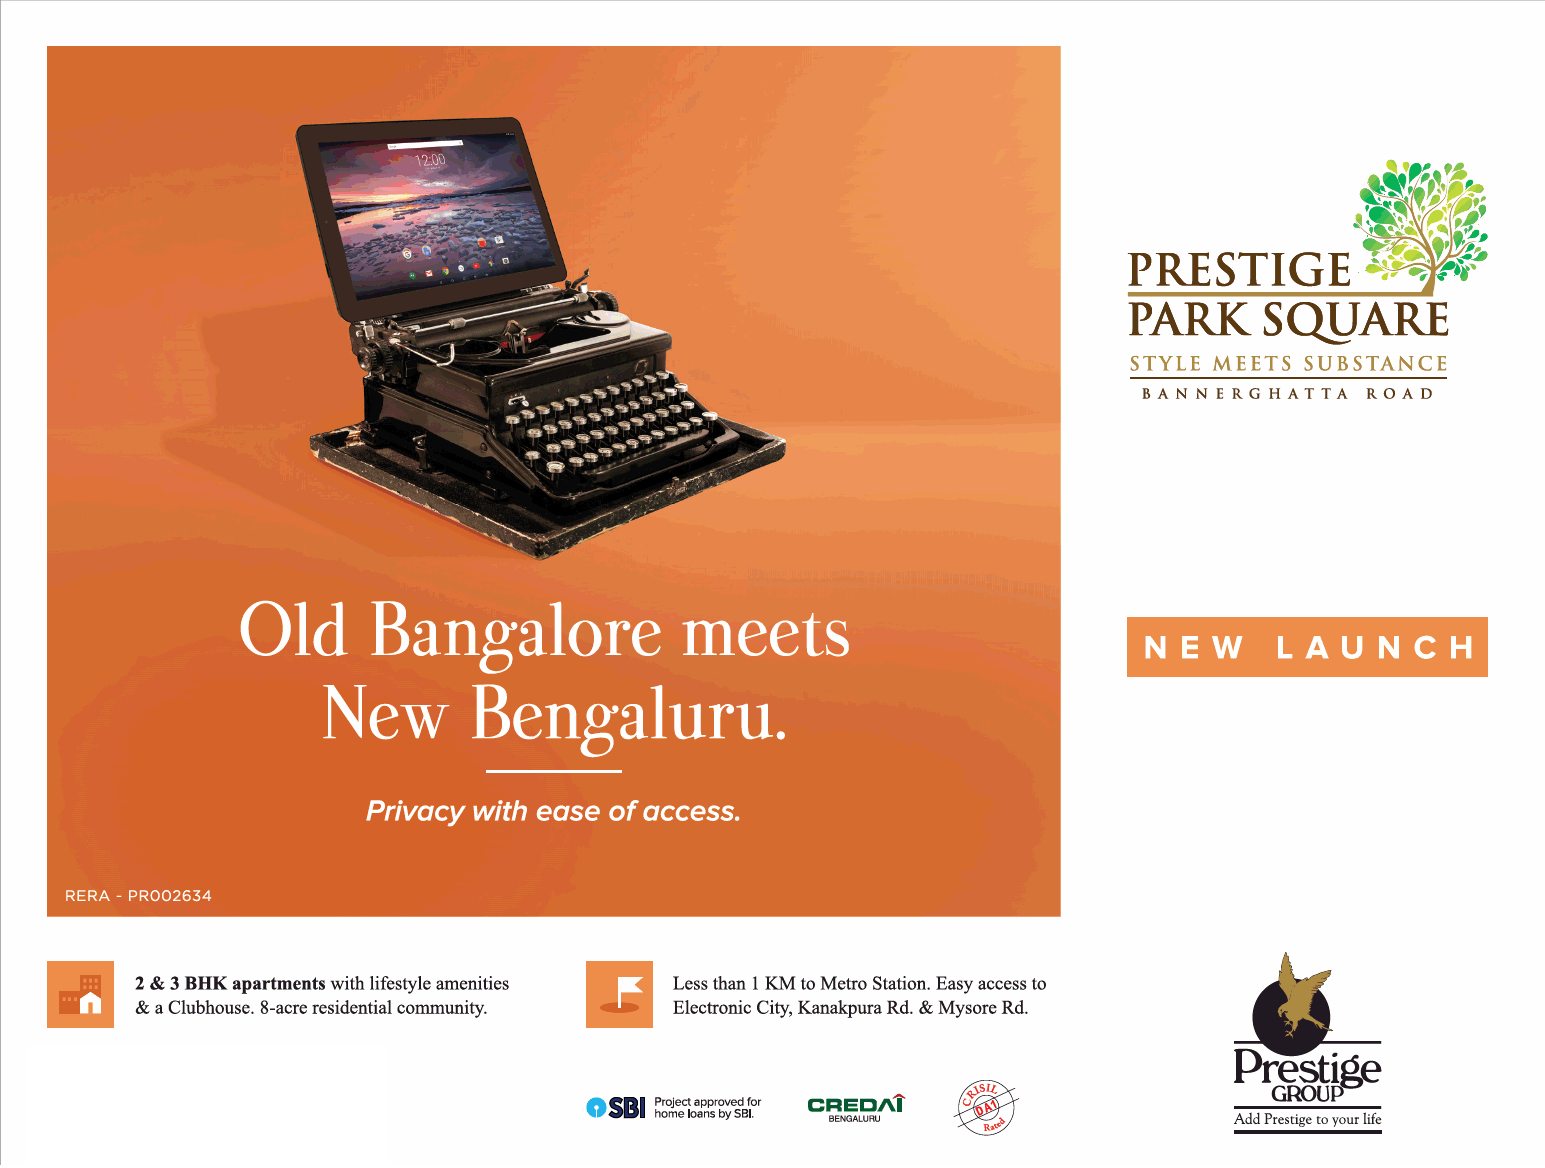 Privacy with ease of access at the new launched Prestige Park Square in Bangalore